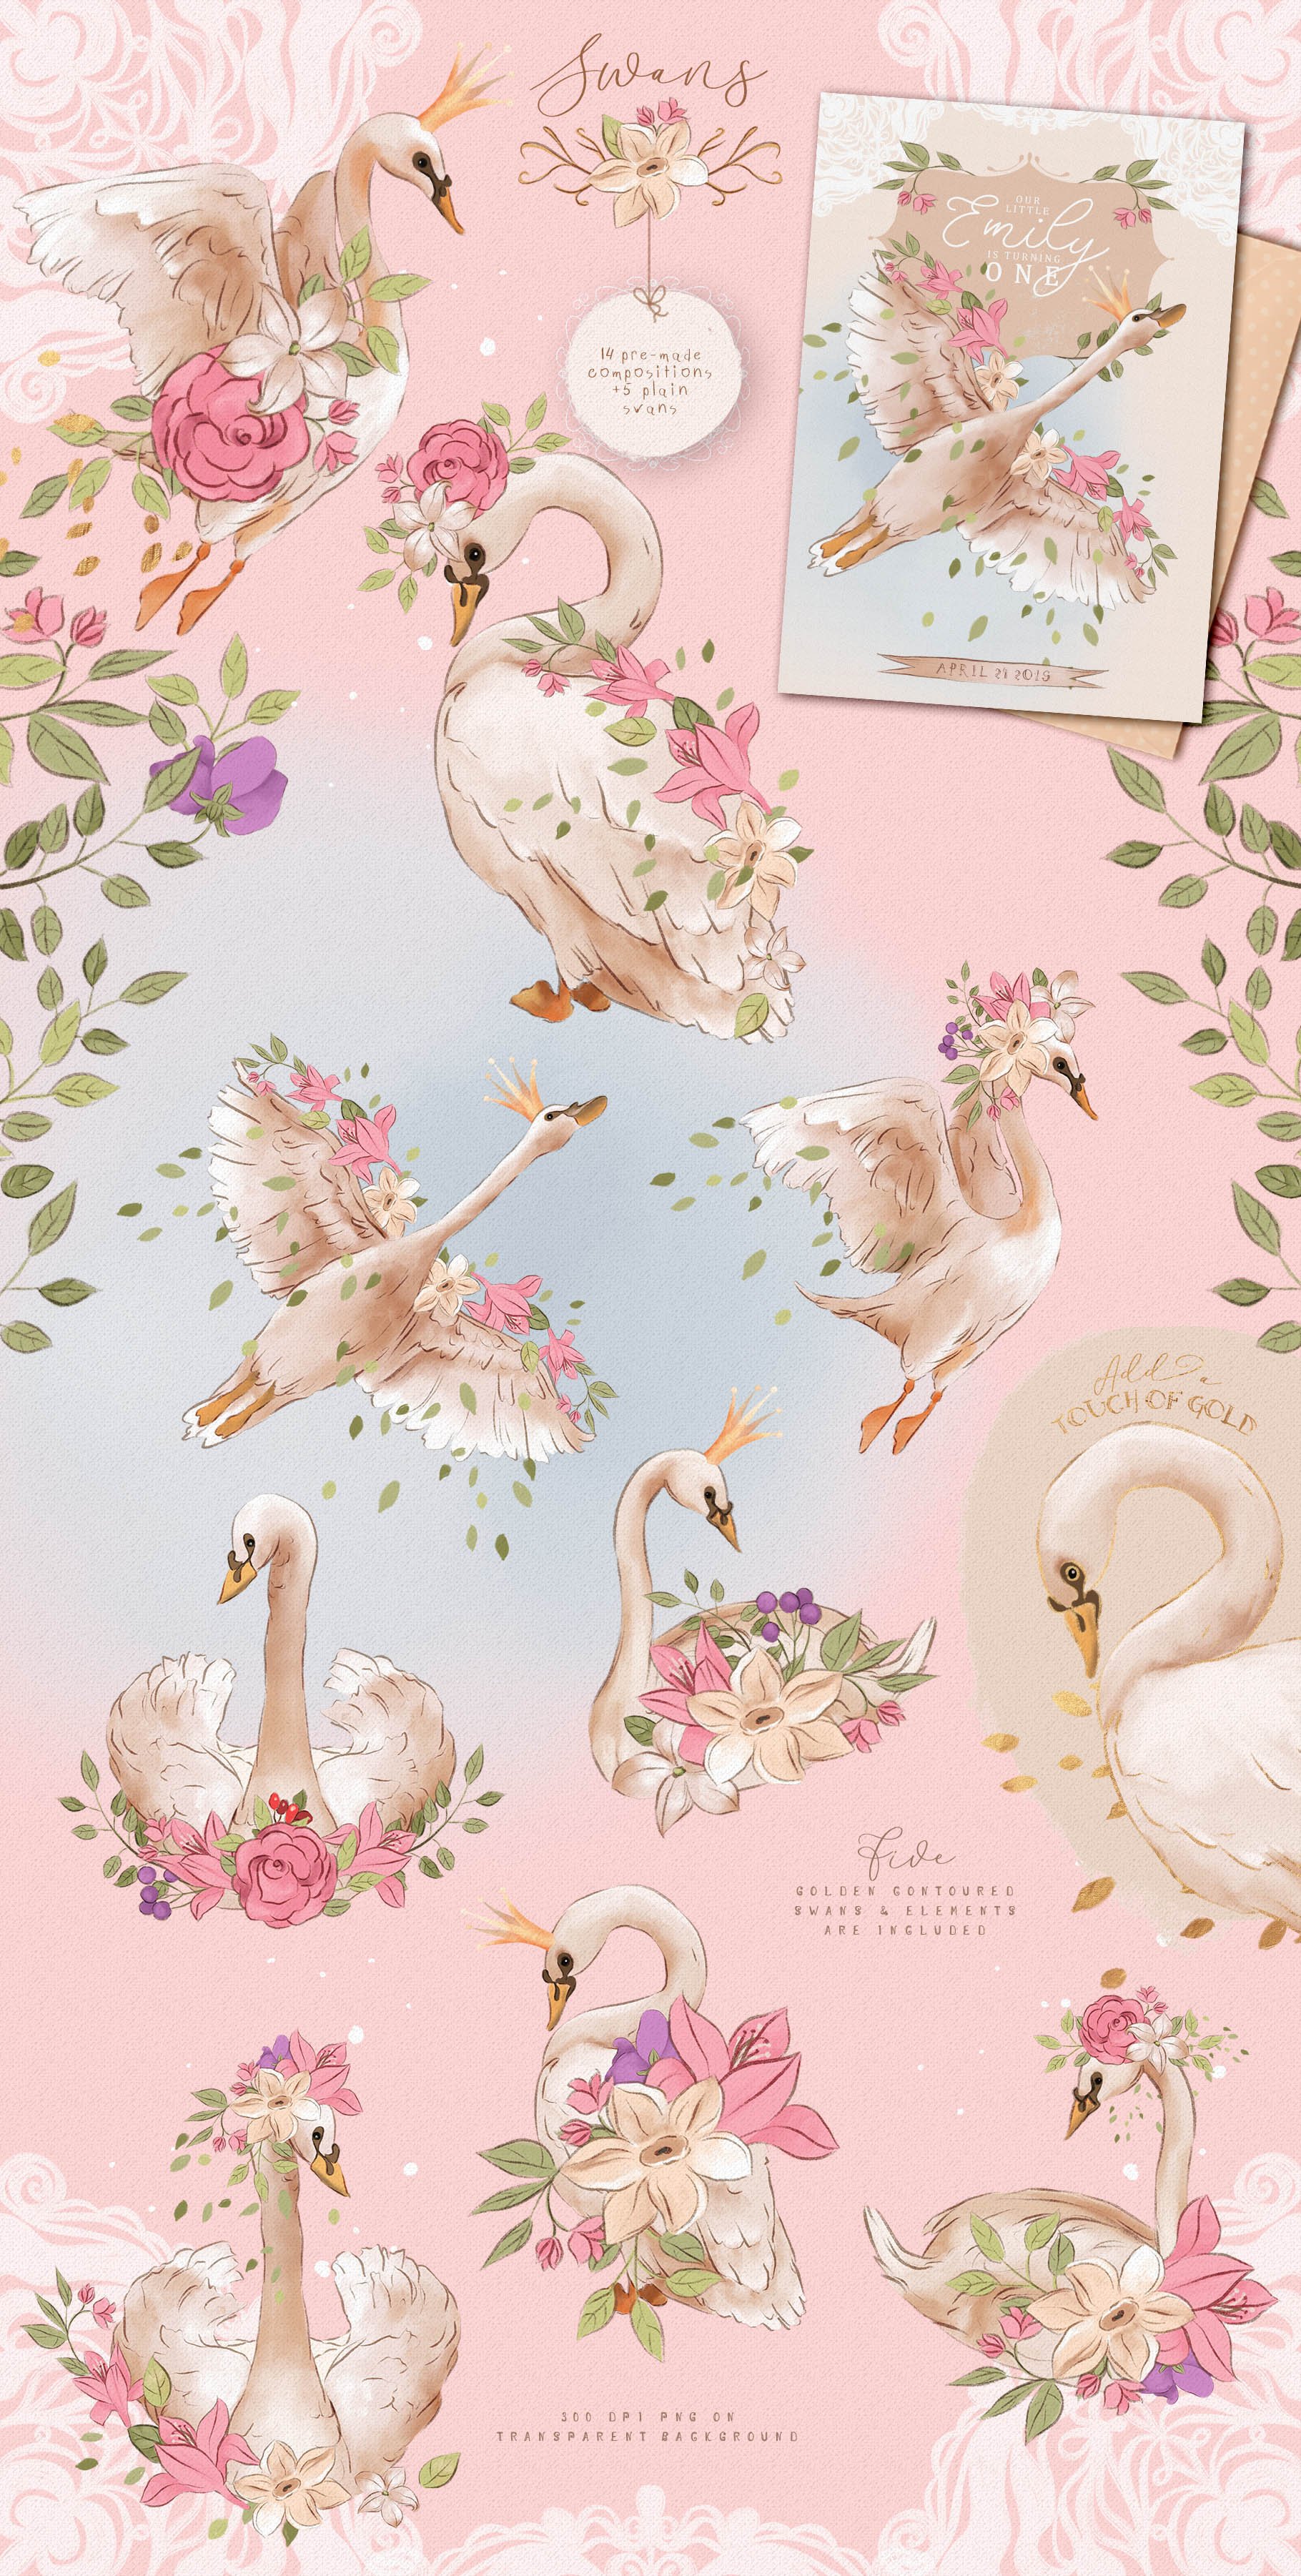 The Princess Swan Collection